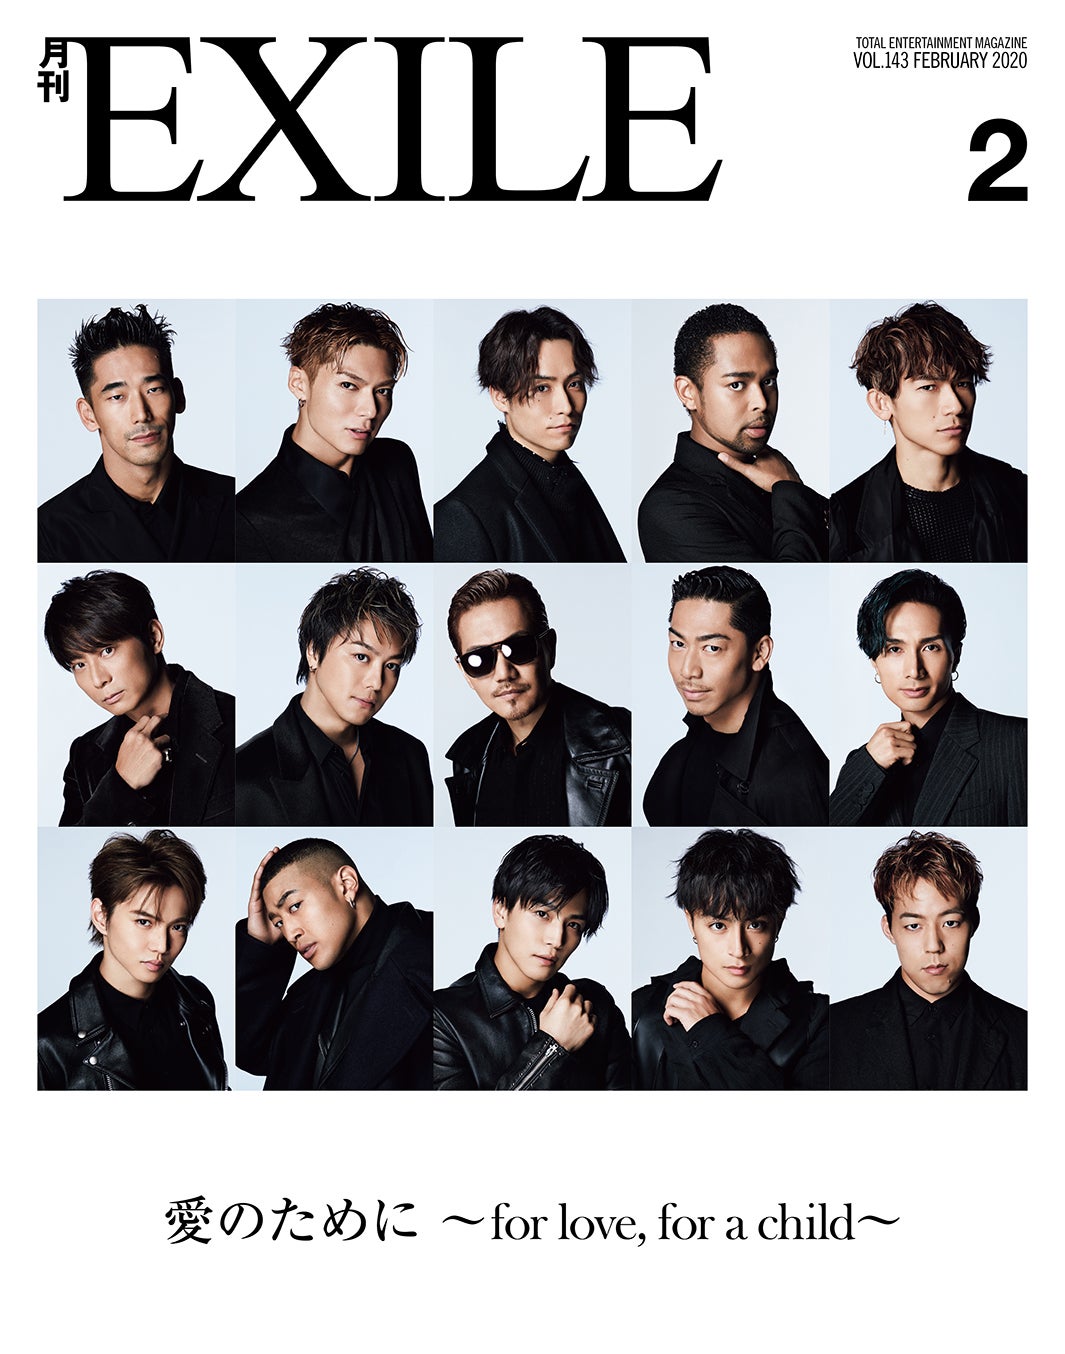 EXILE「LDH PERFECT YEAR 2020」への想い明かす - モデルプレス